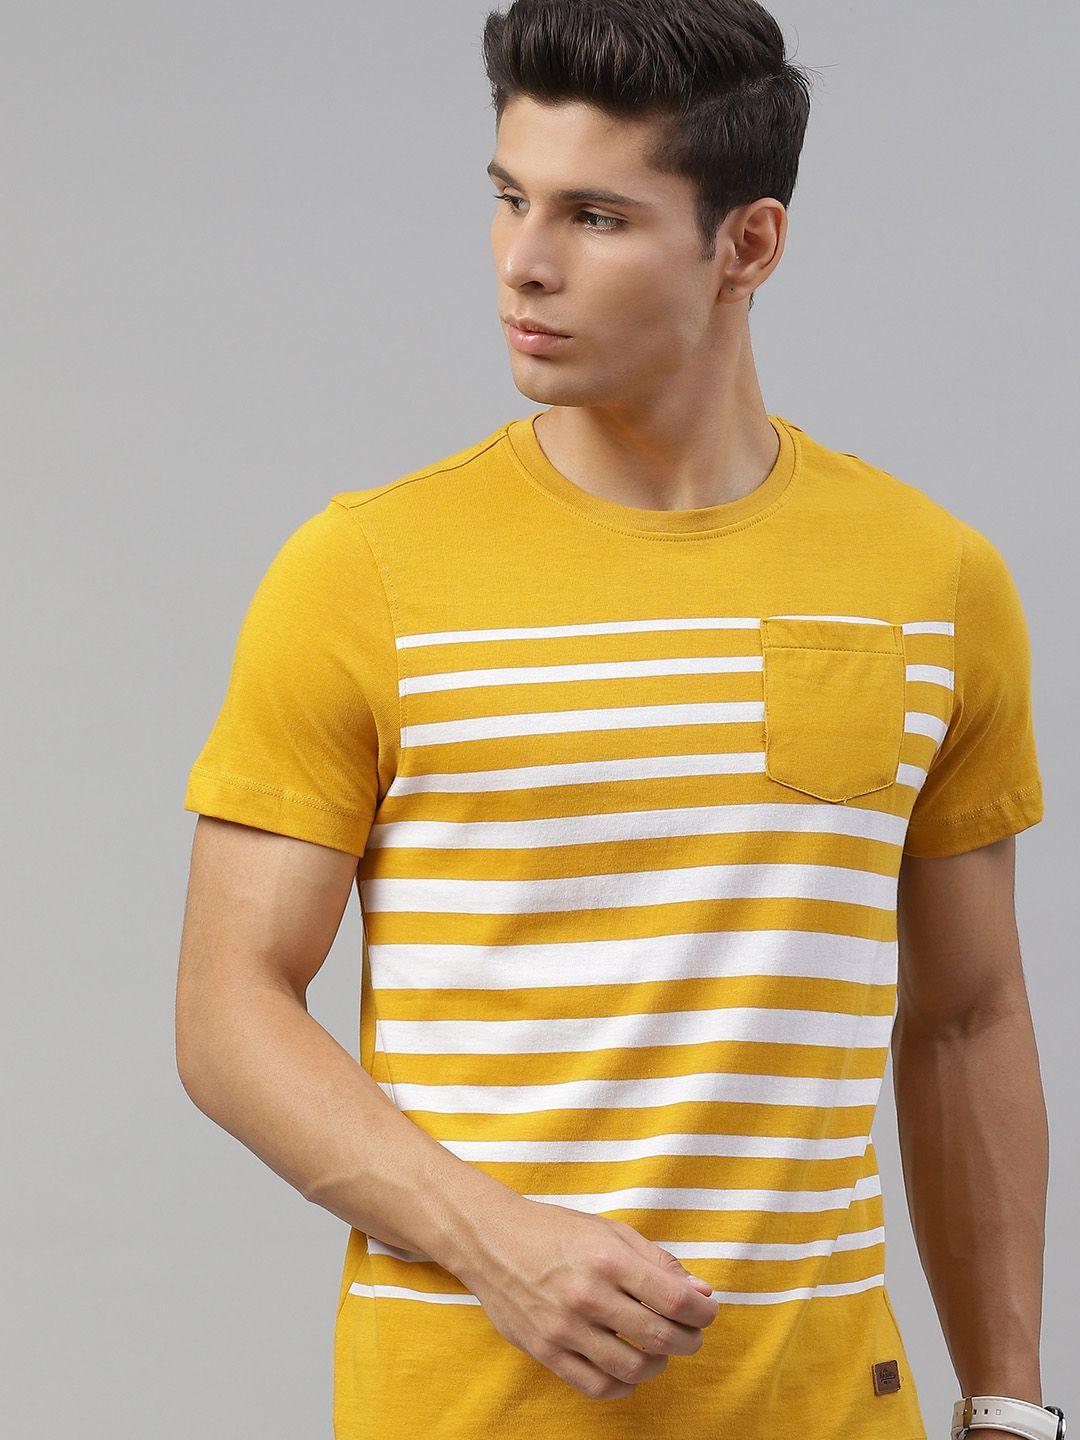 the roadster lifestyle co men mustard yellow & white striped pocket detailing t-shirt